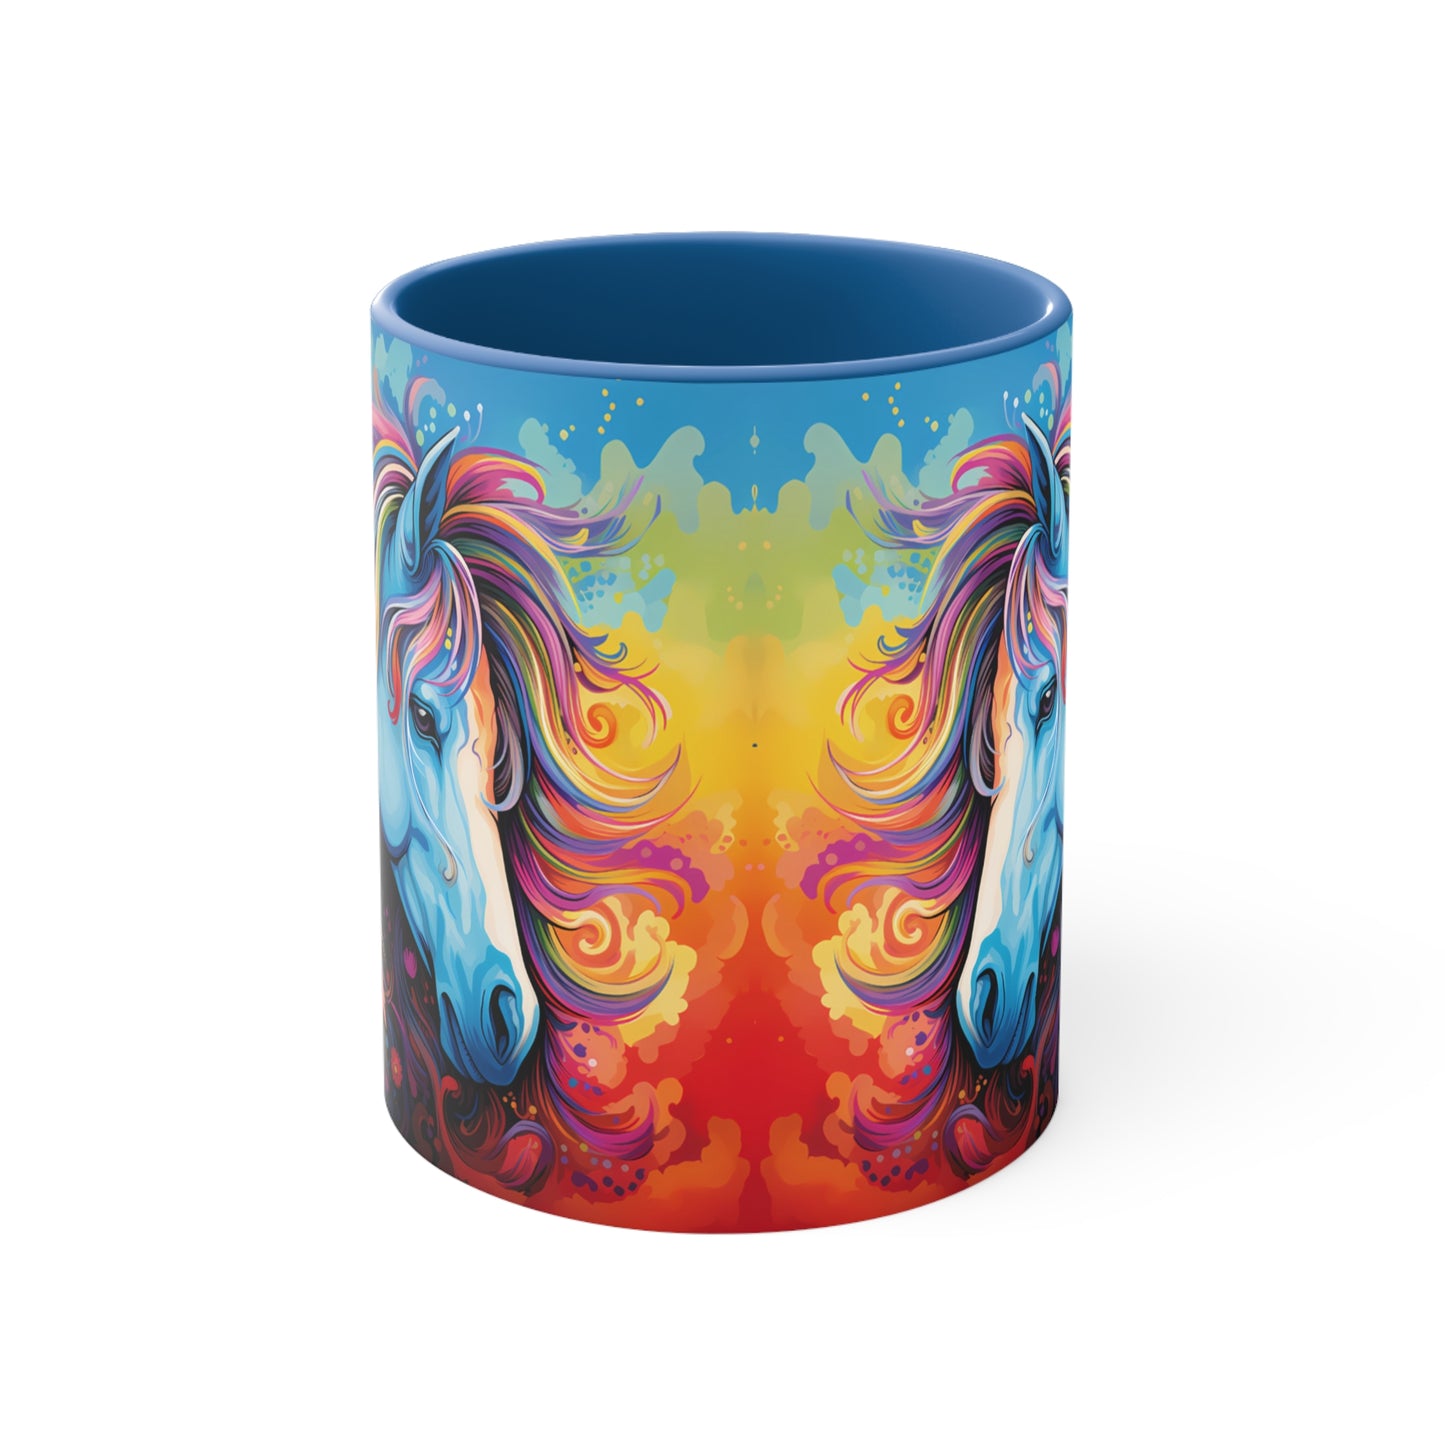 MAGESTIC BLUE HORSE MUG - Available in Red, Blue, Navy, Black and Pink - MUGSCITY - Free Shipping